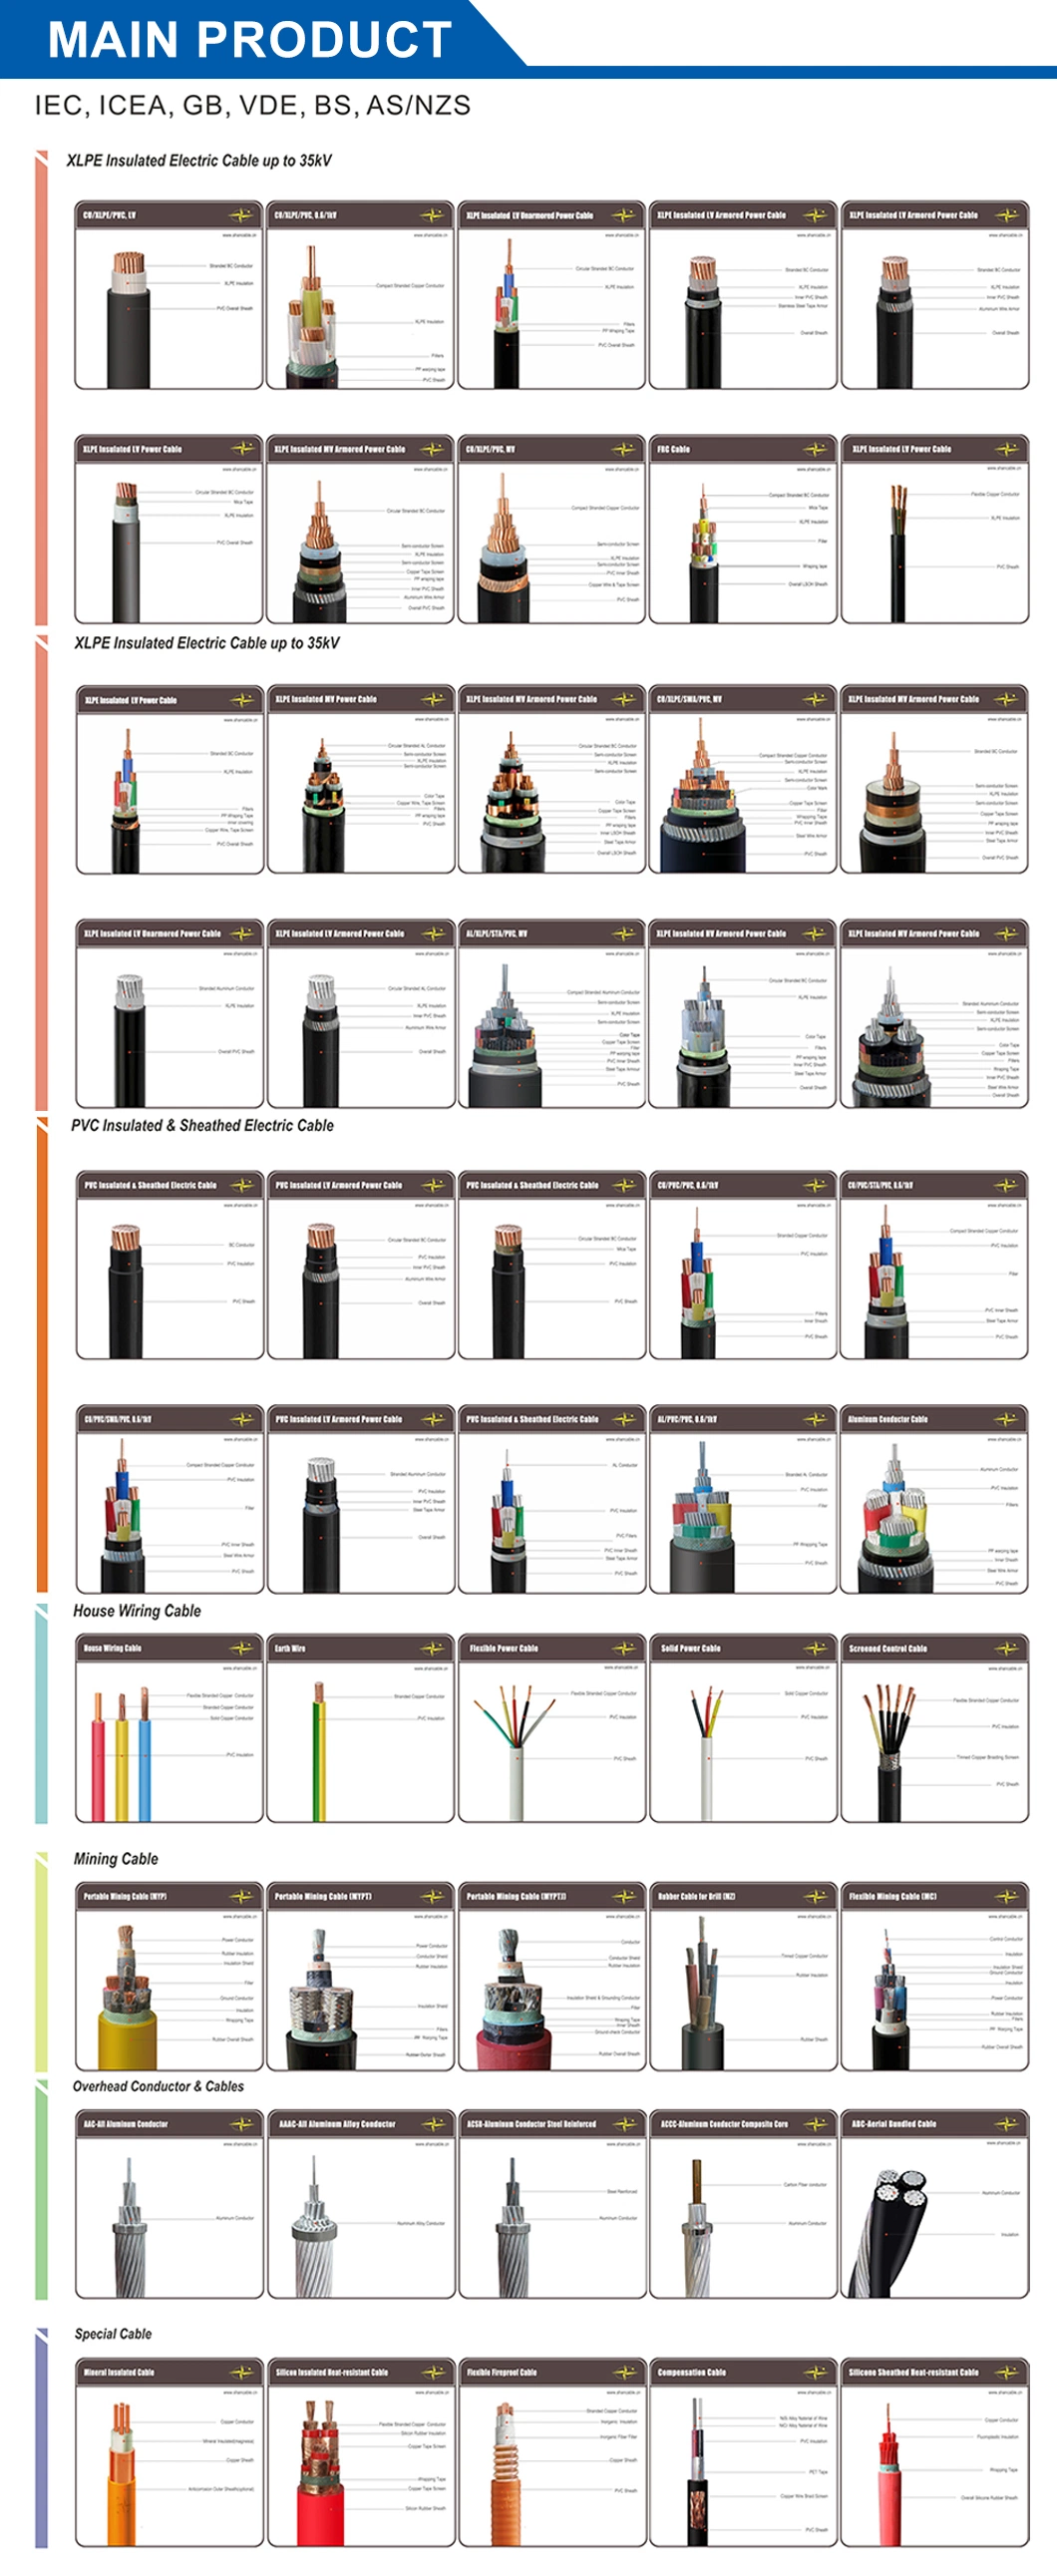 Reliable Armoured Electrical Cable for Safety Critical Applications